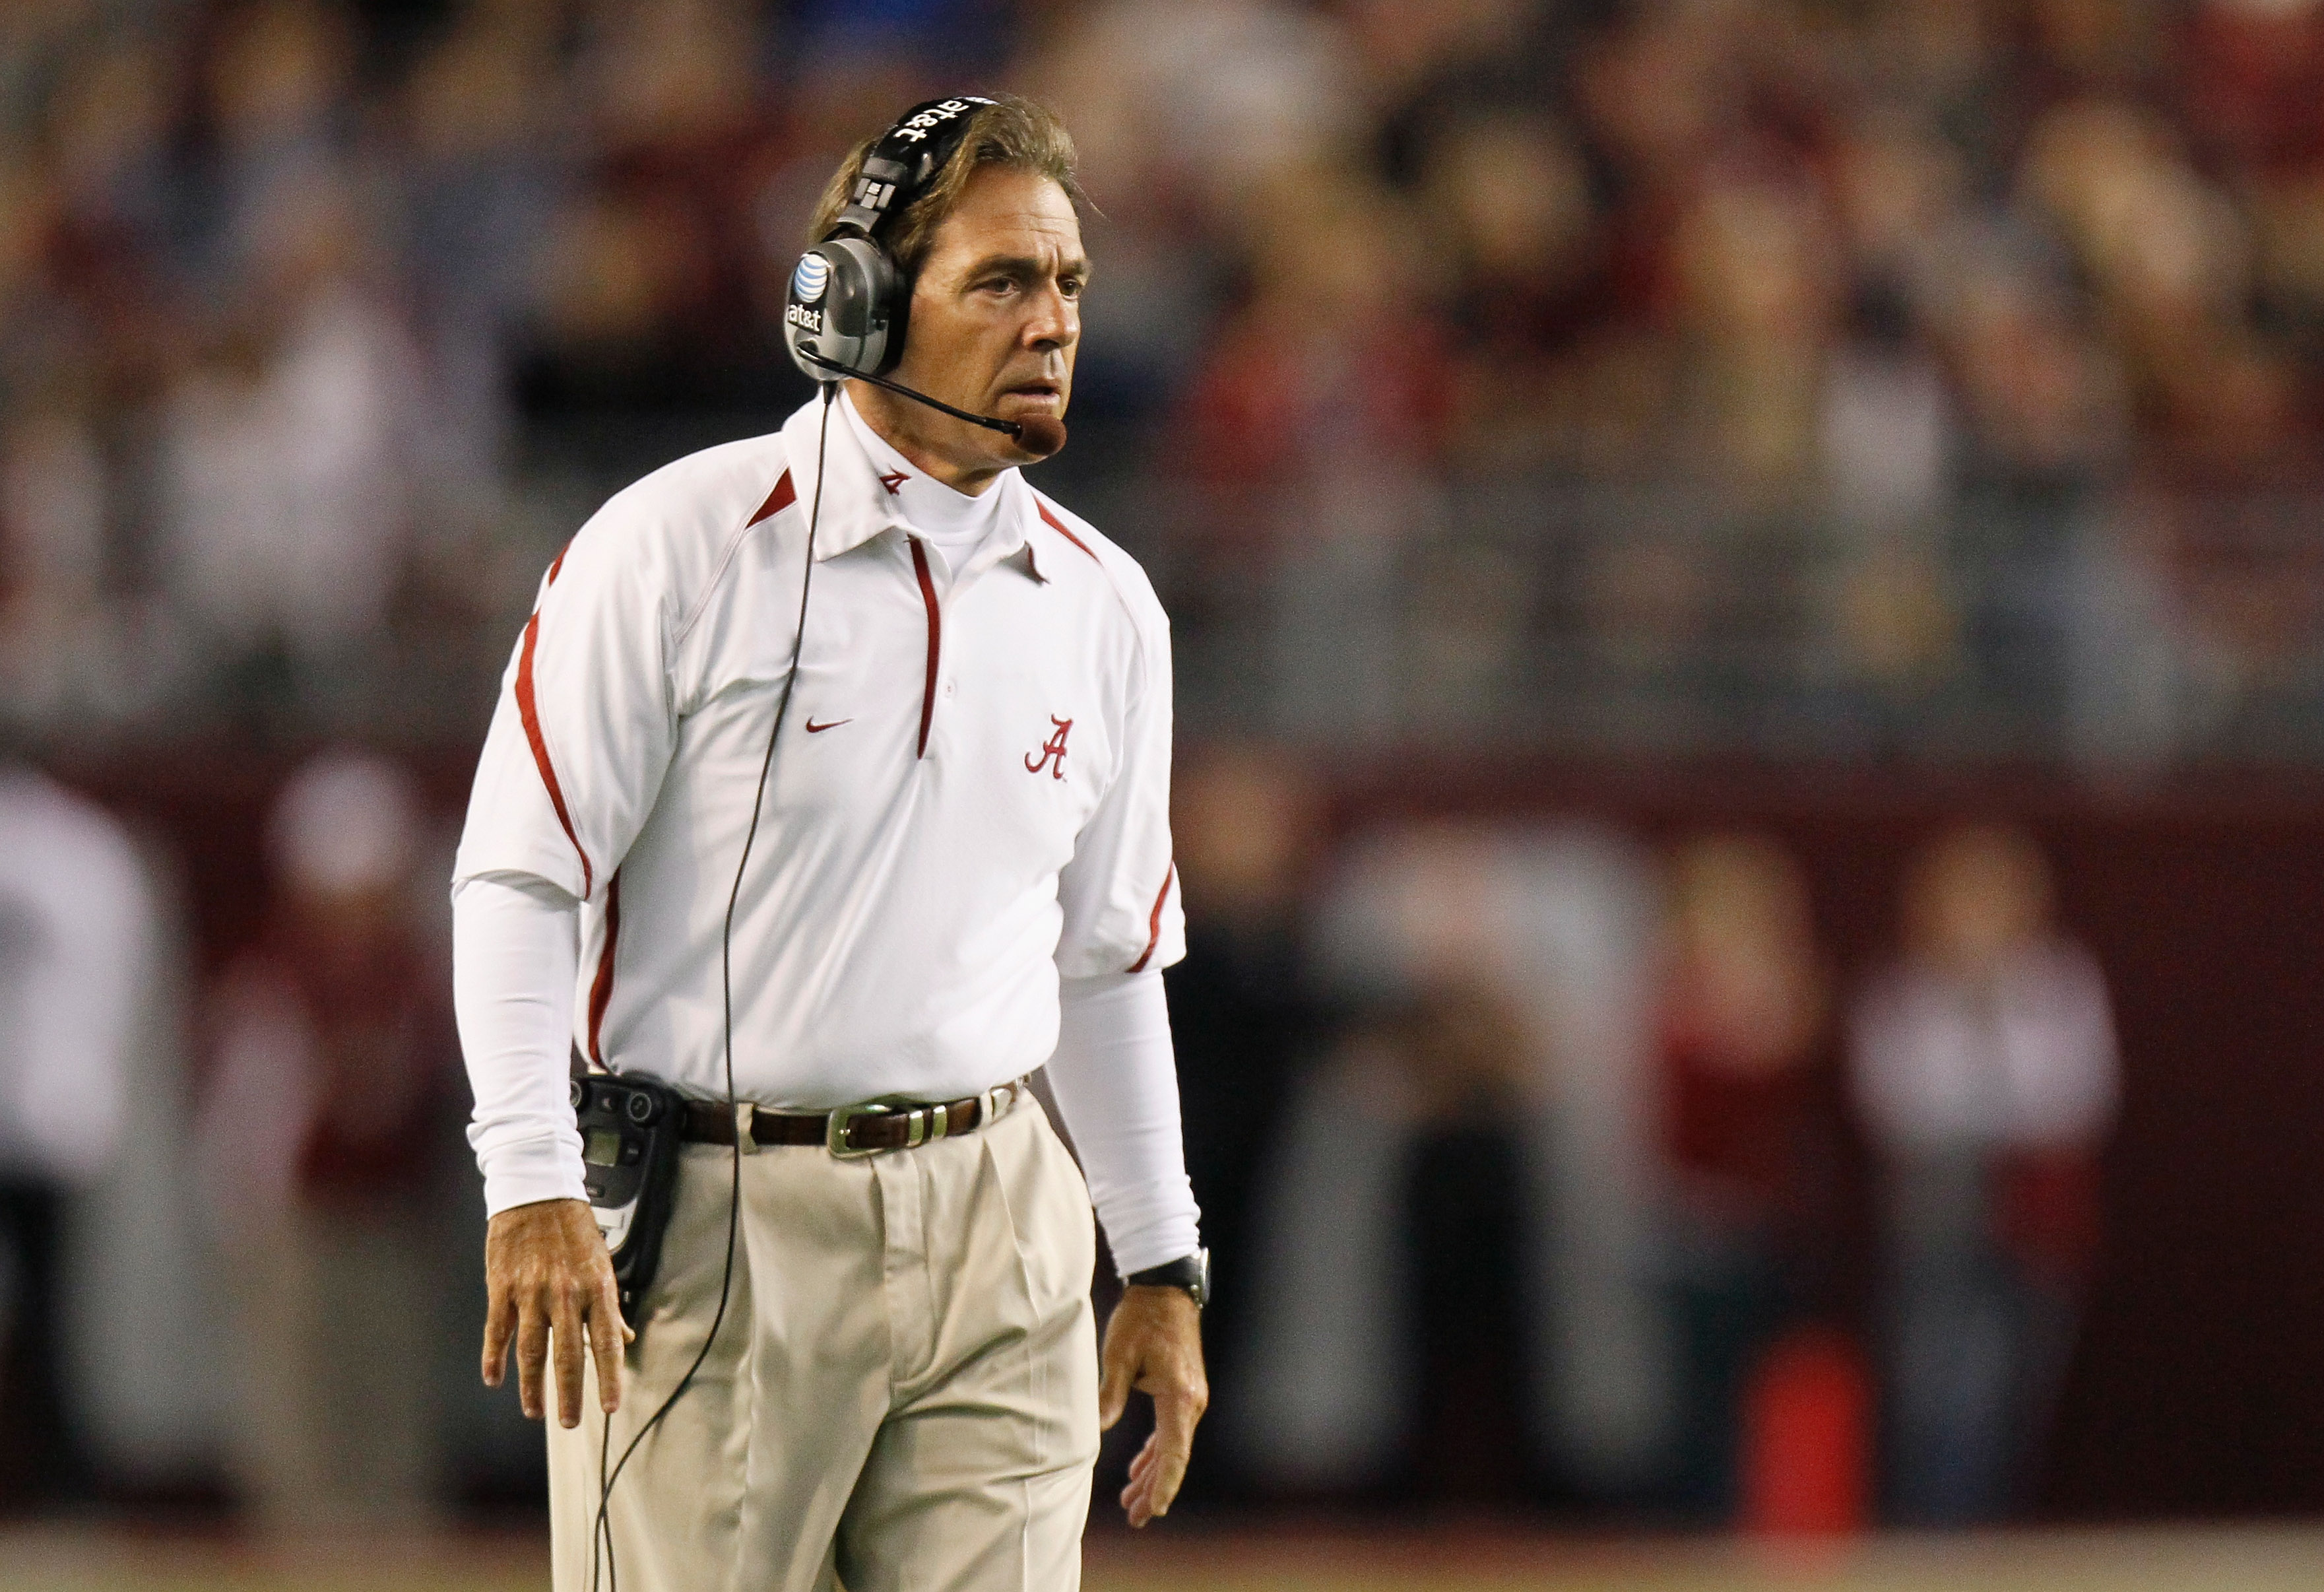 TUSCALOOSA, AL - OCTOBER 16:  Head coach Nick Saban of the Alabama Crimson Tide against the Ole Miss Rebels at Bryant-Denny Stadium on October 16, 2010 in Tuscaloosa, Alabama.  (Photo by Kevin C. Cox/Getty Images)